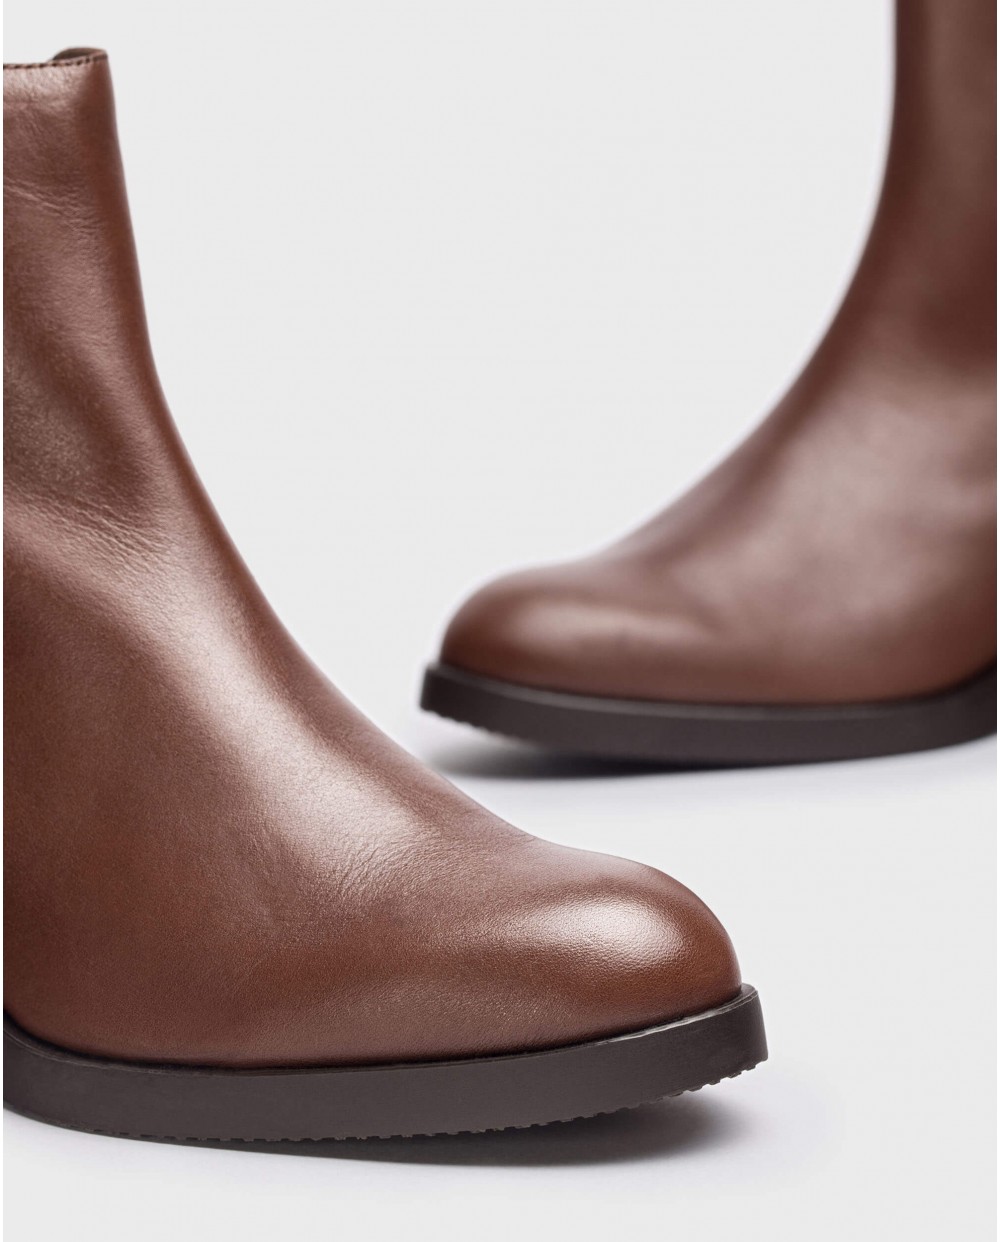 Wonders-Ankle Boots-Brown KATE boots